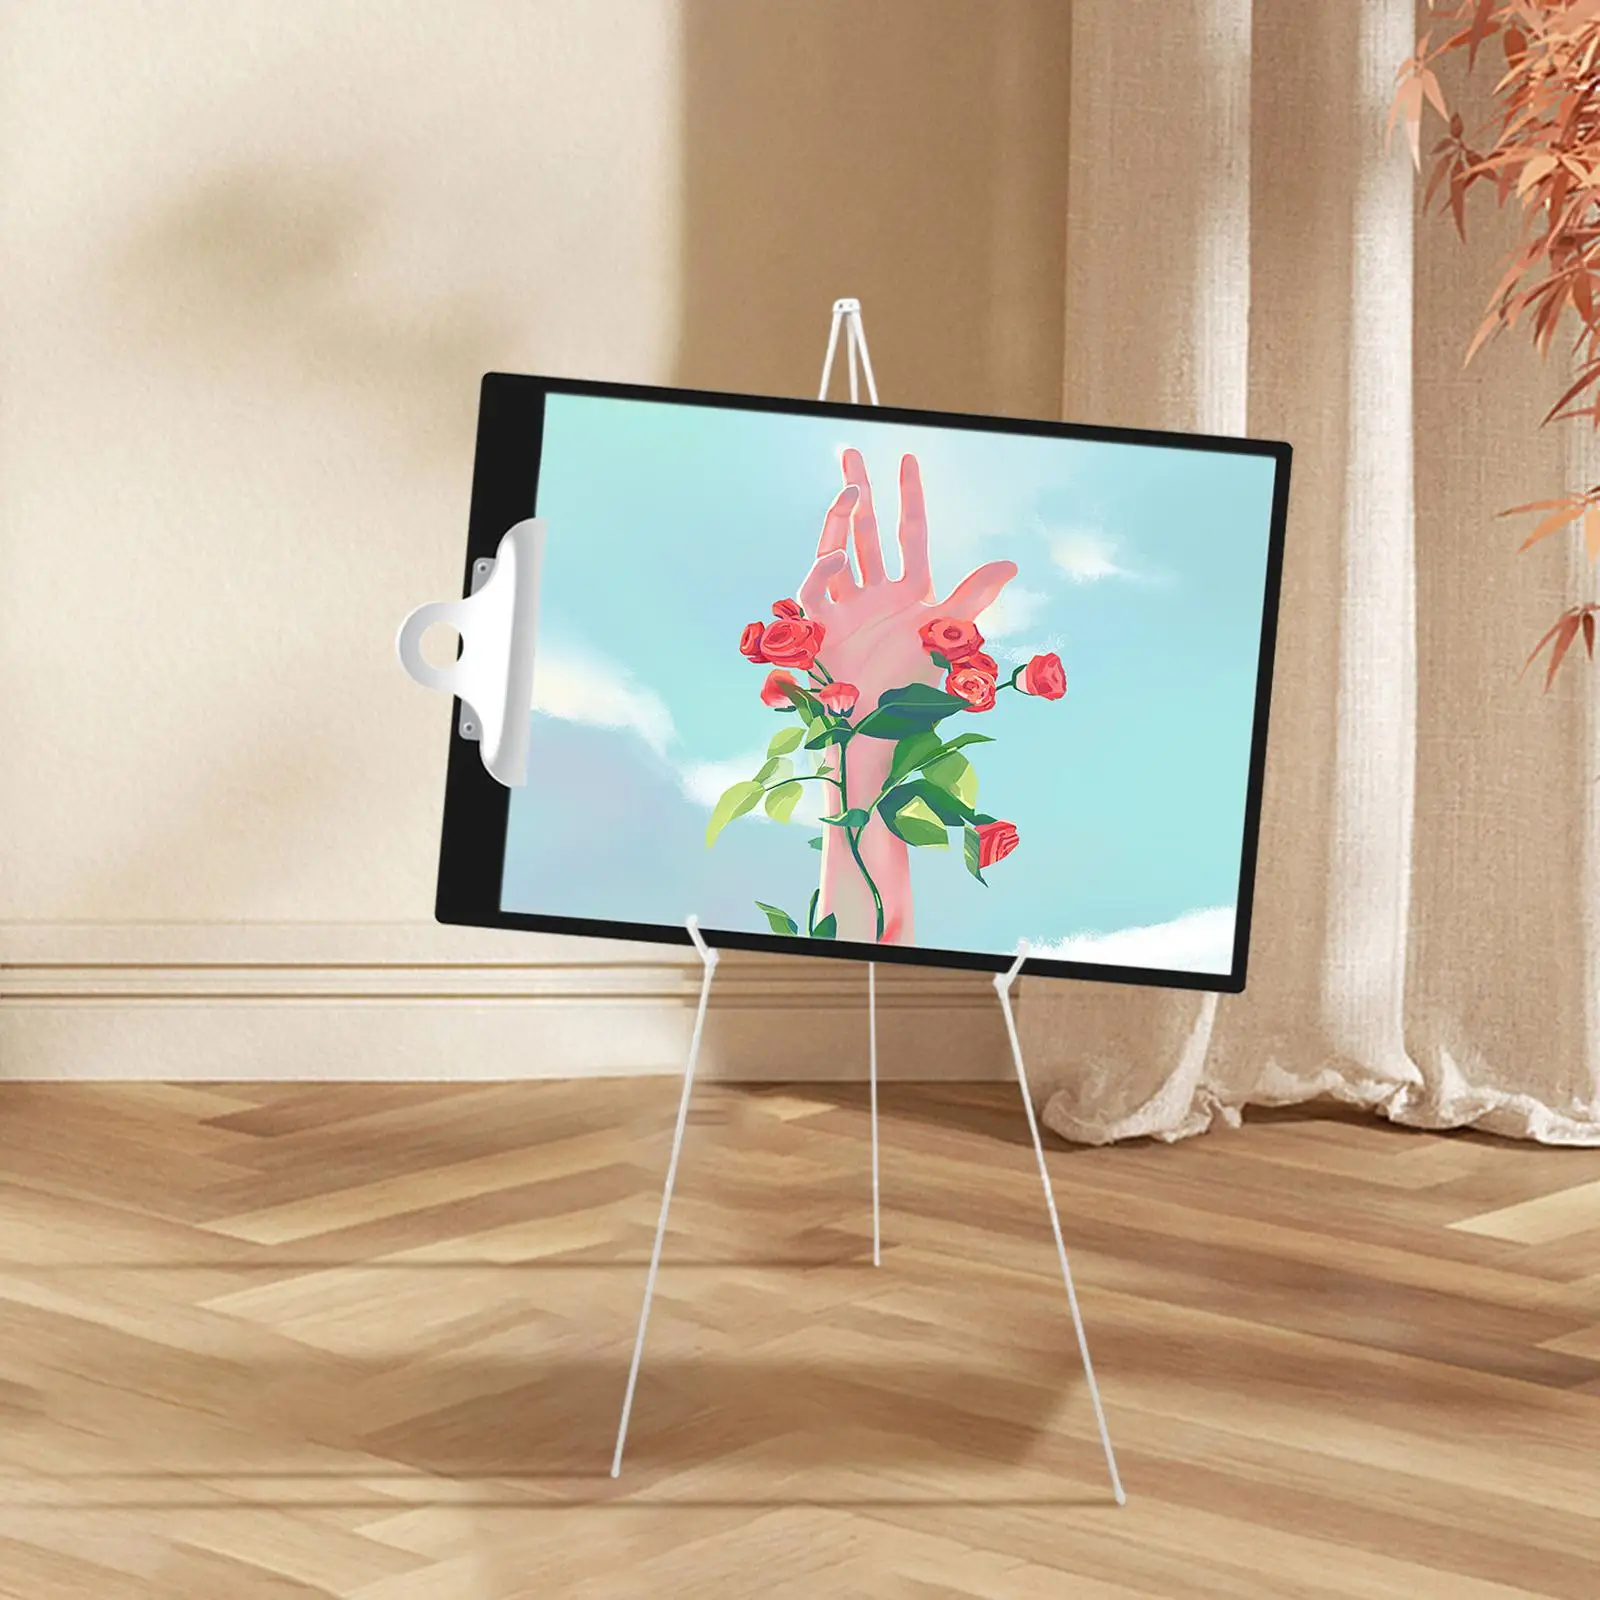 Tripod Display Easel Stand Holder Lightweight for Floor Folding Poster Easel for Sign Wedding Party Birthday Picture Photo Frame